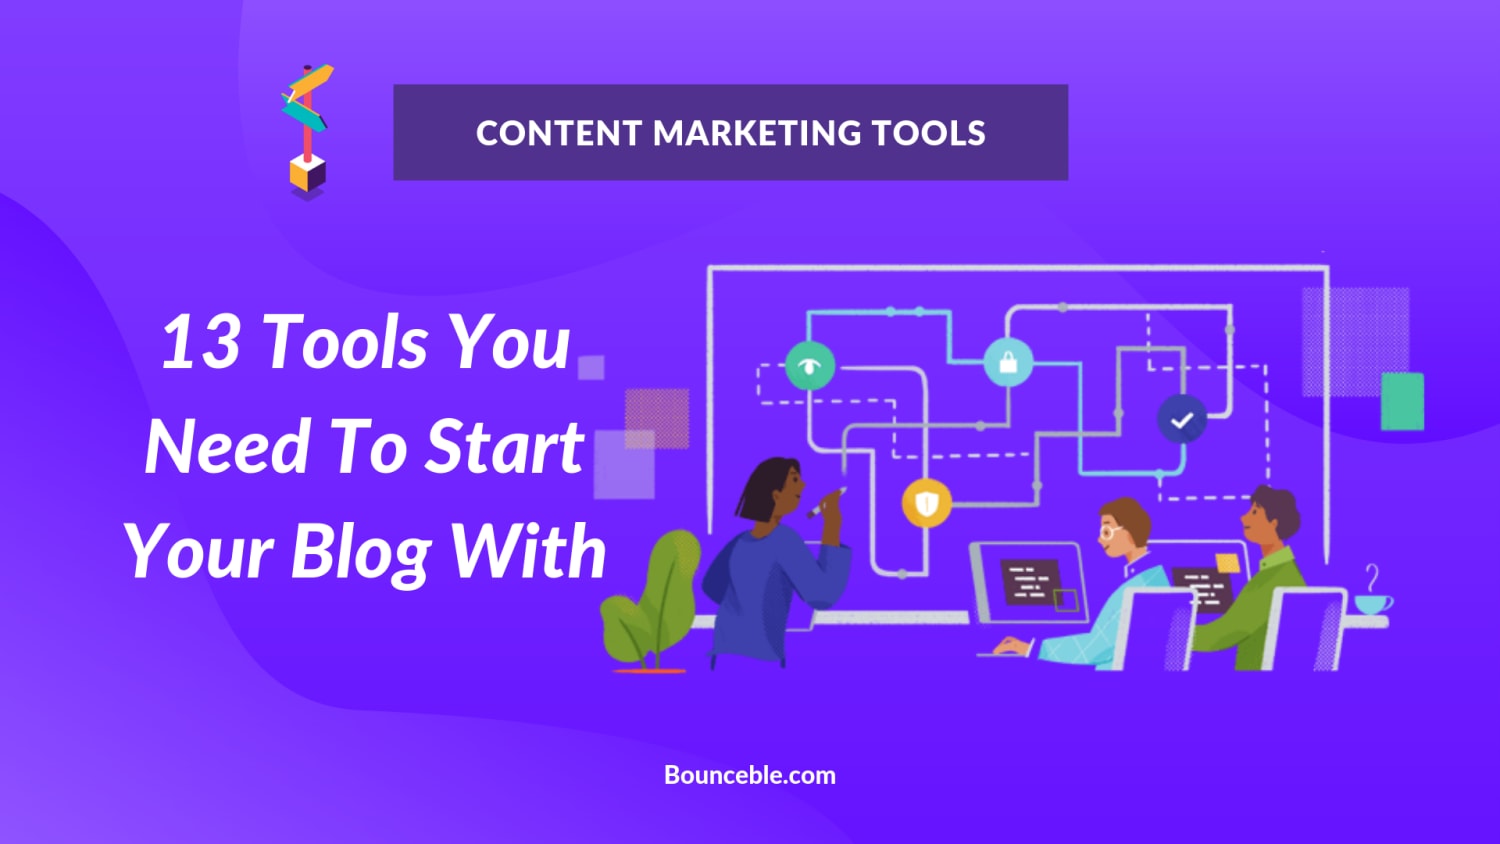 13 Content Marketing Tools You Need To Start Your Blog With